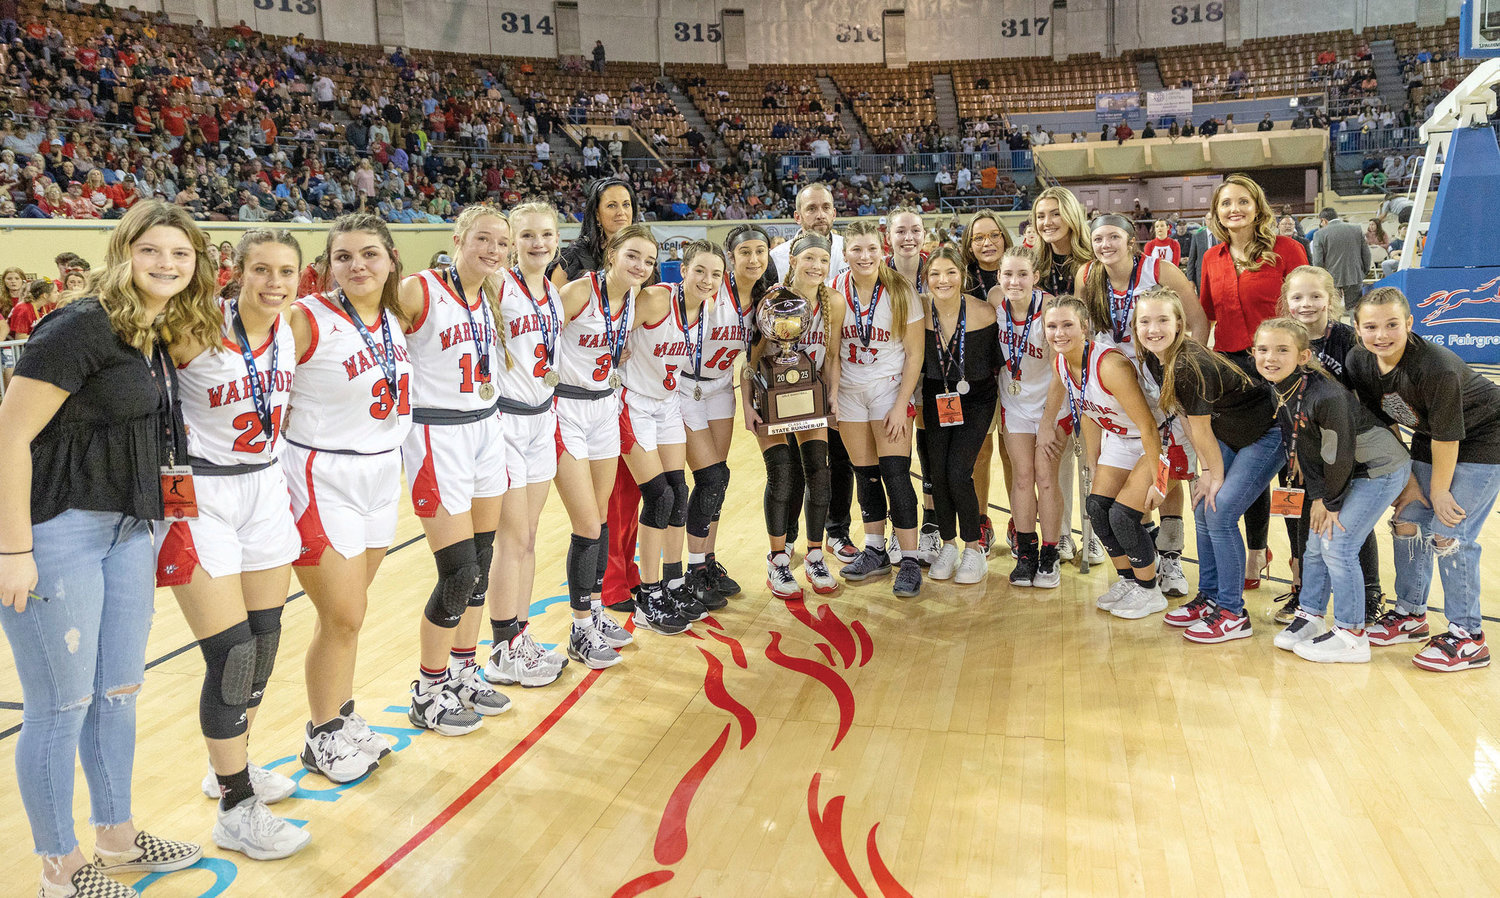 The Washington girls basketball team took the silver ball at the State basketball tournament Saturday at the Big House at the State Fairgrounds. Washington was defeated by Jones 39-33. The Warriors defeated Silo (50-34) and Kiefer (46-43) in the first and second rounds, respectively.